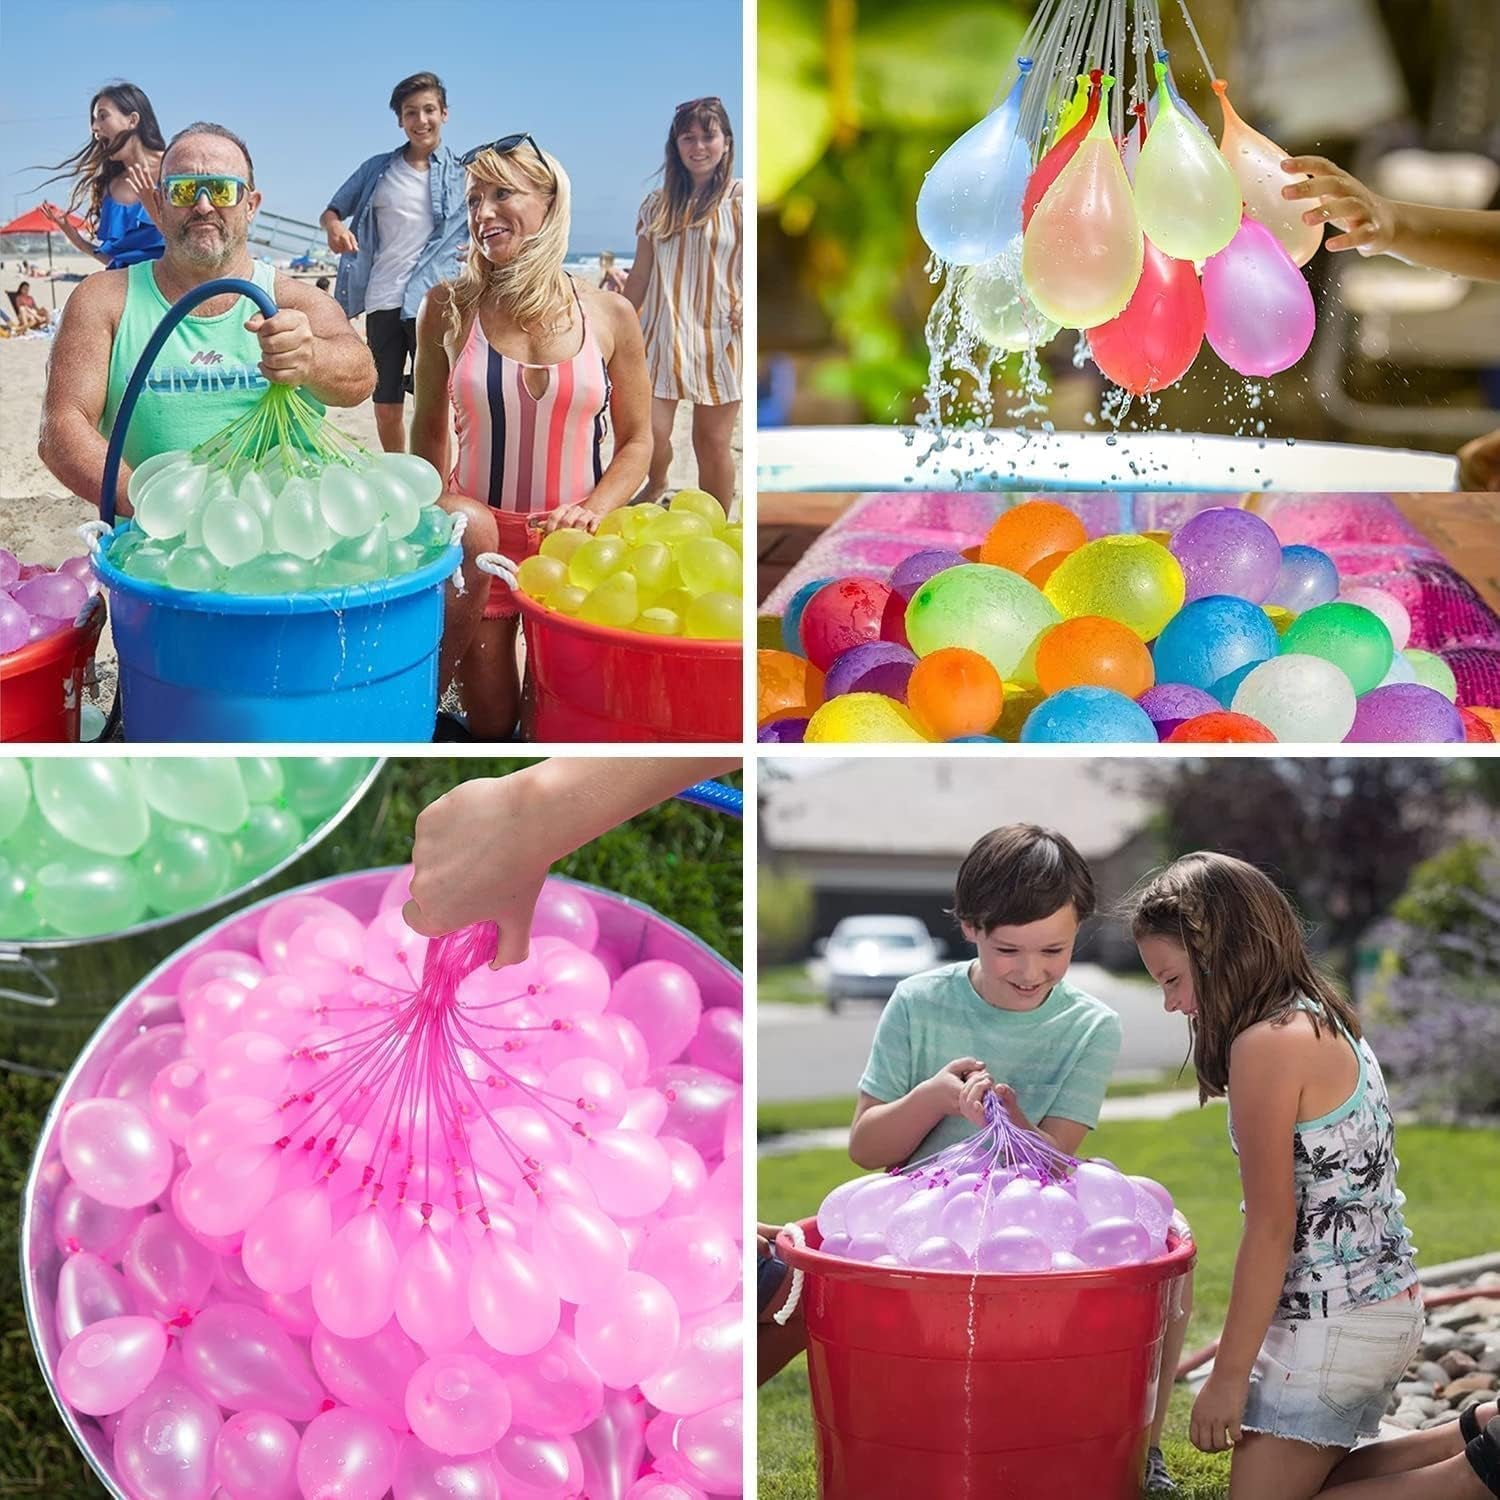 1000PCS Water Balloons, Water Balloons Quick Fill Colorful Air Balloons,Biodegradable Summer Splash Balloon Toys,For Water Bomb Game Fight Sports Fun Party